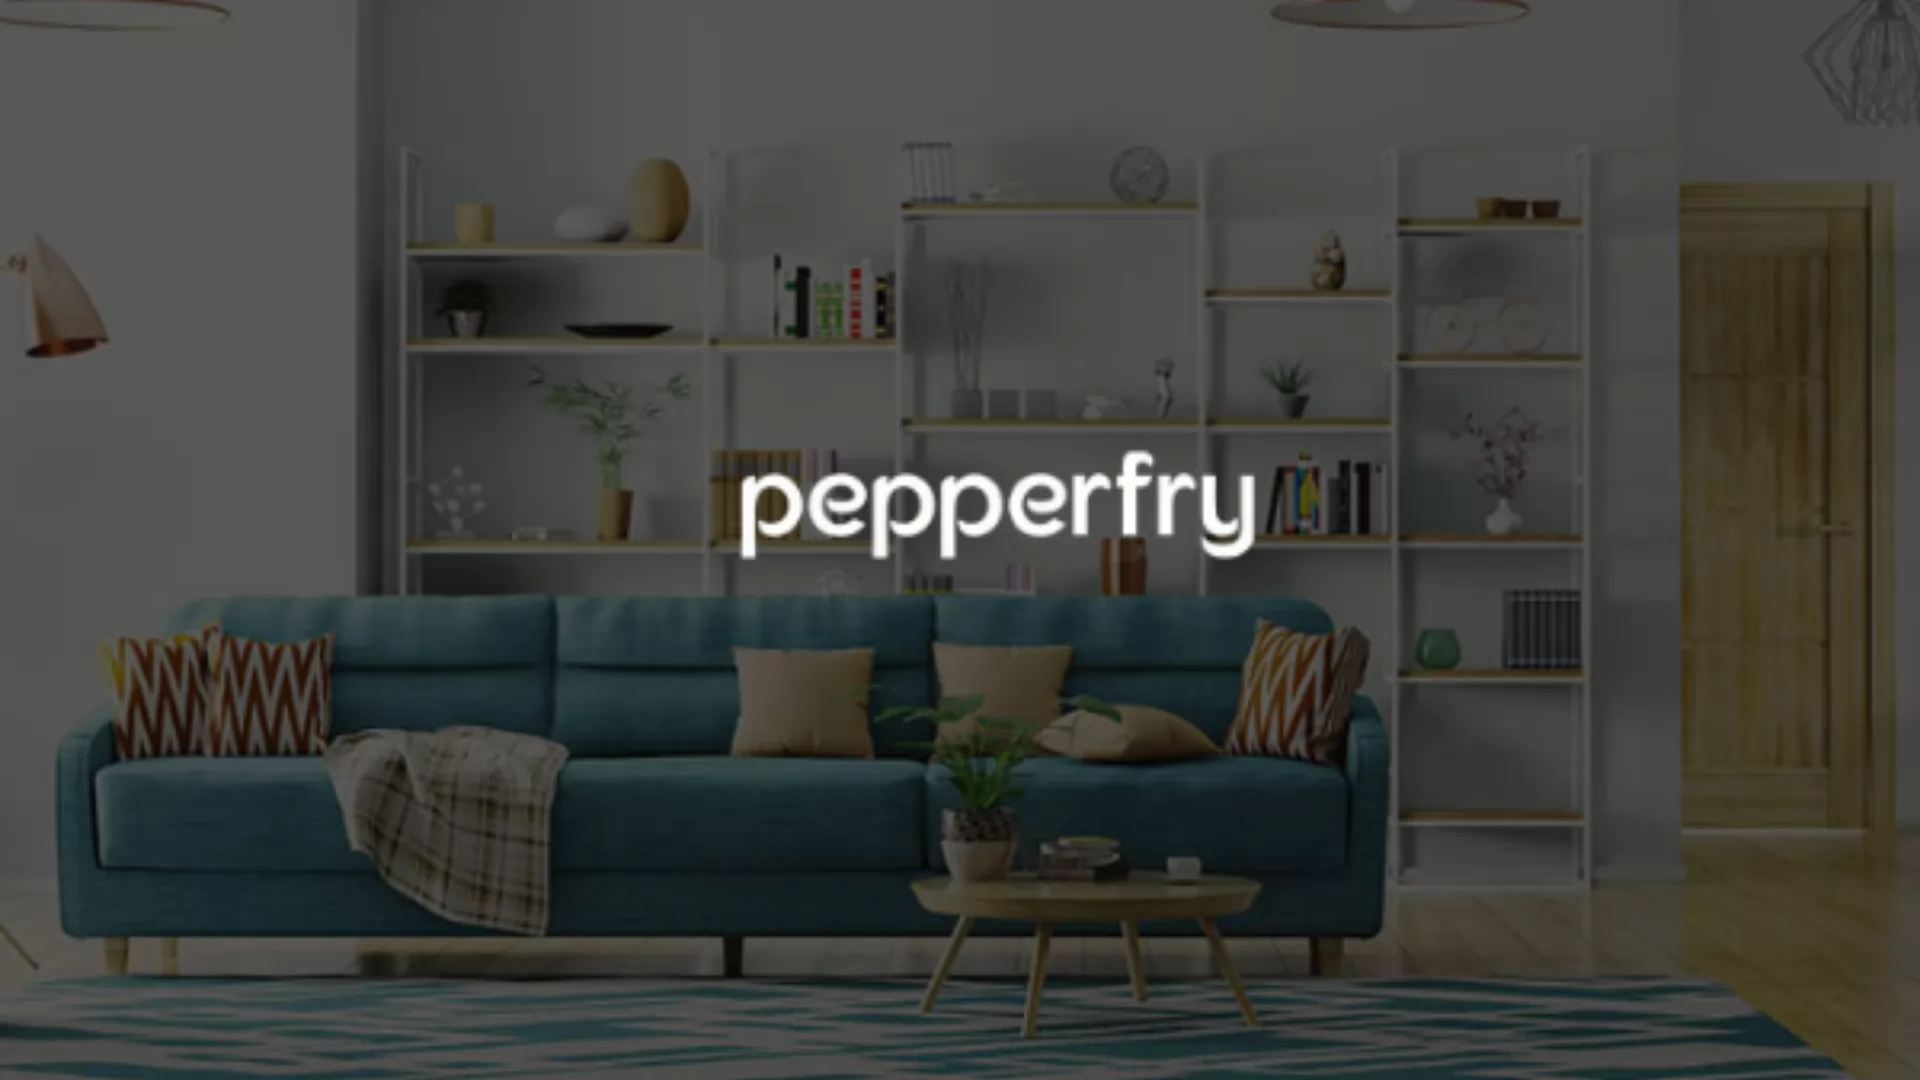 How to Use Pepperfry Credits?